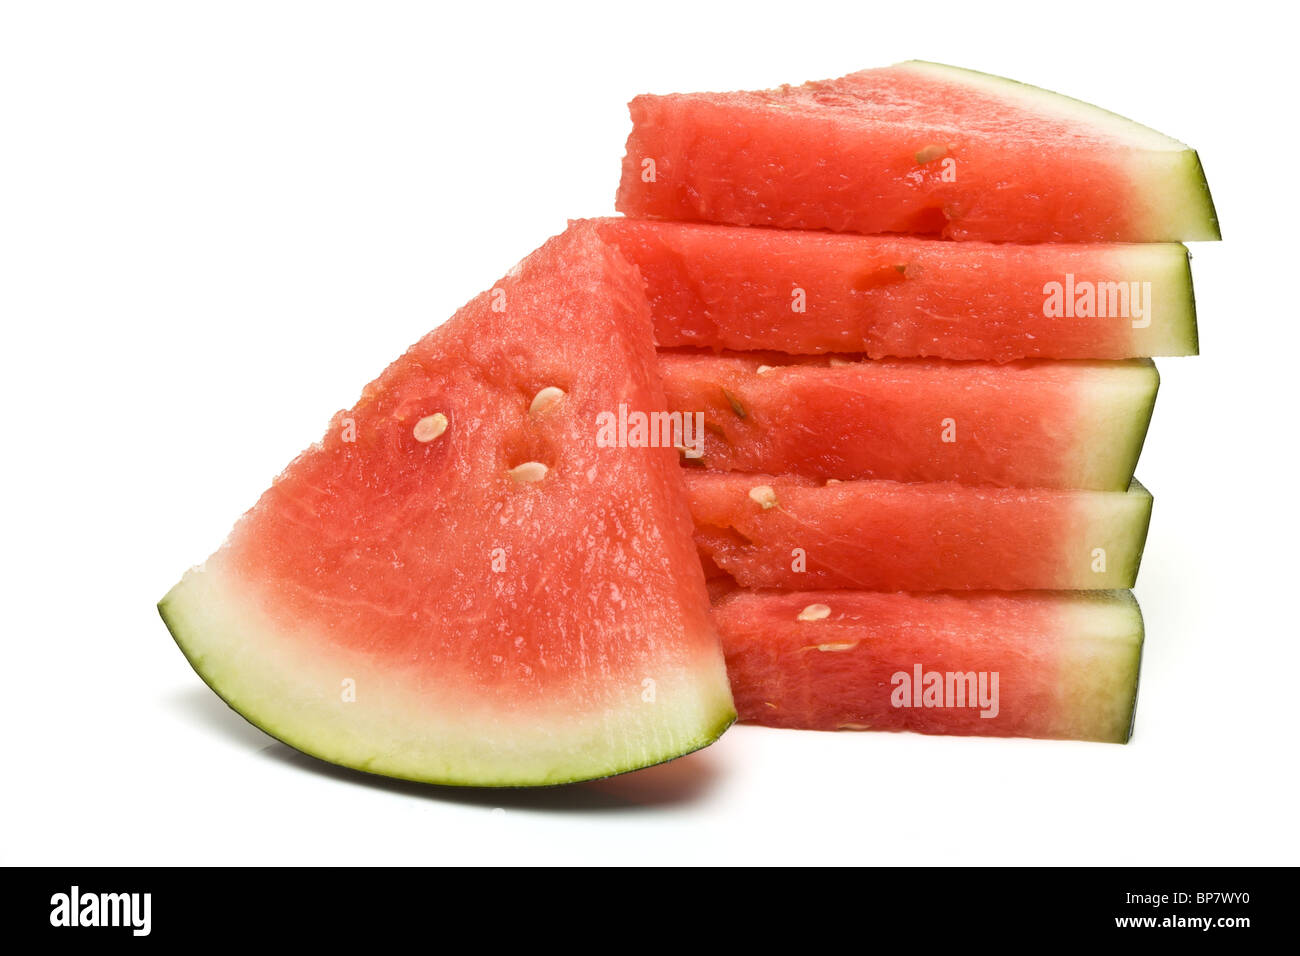 Abstract image of Watermelon segments stacked up from low viewpoint. Stock Photo